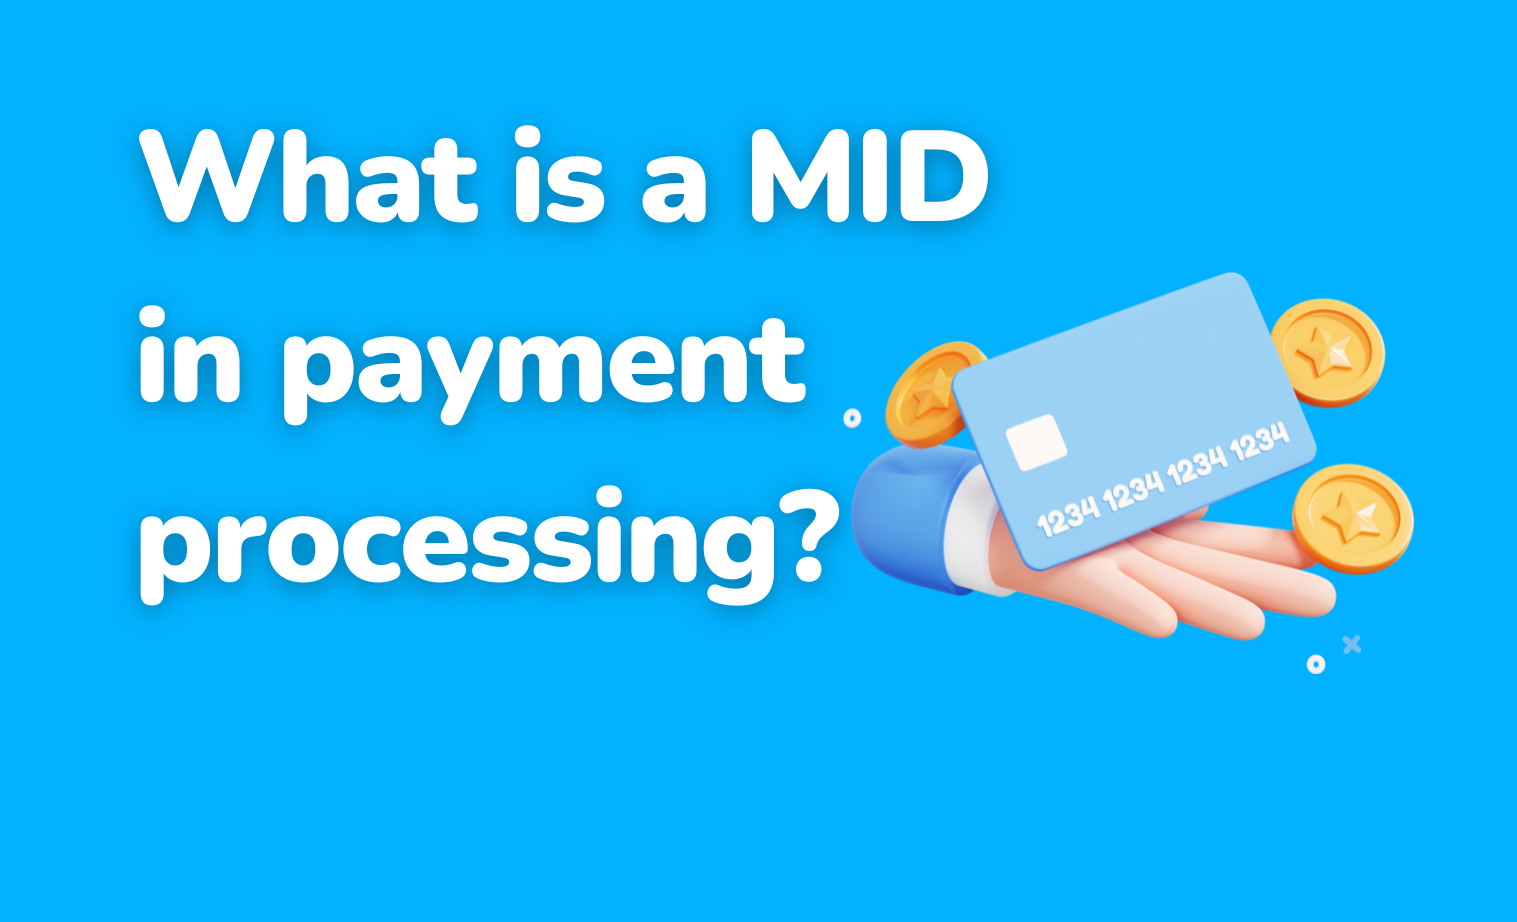 What is a MID in payment processing?